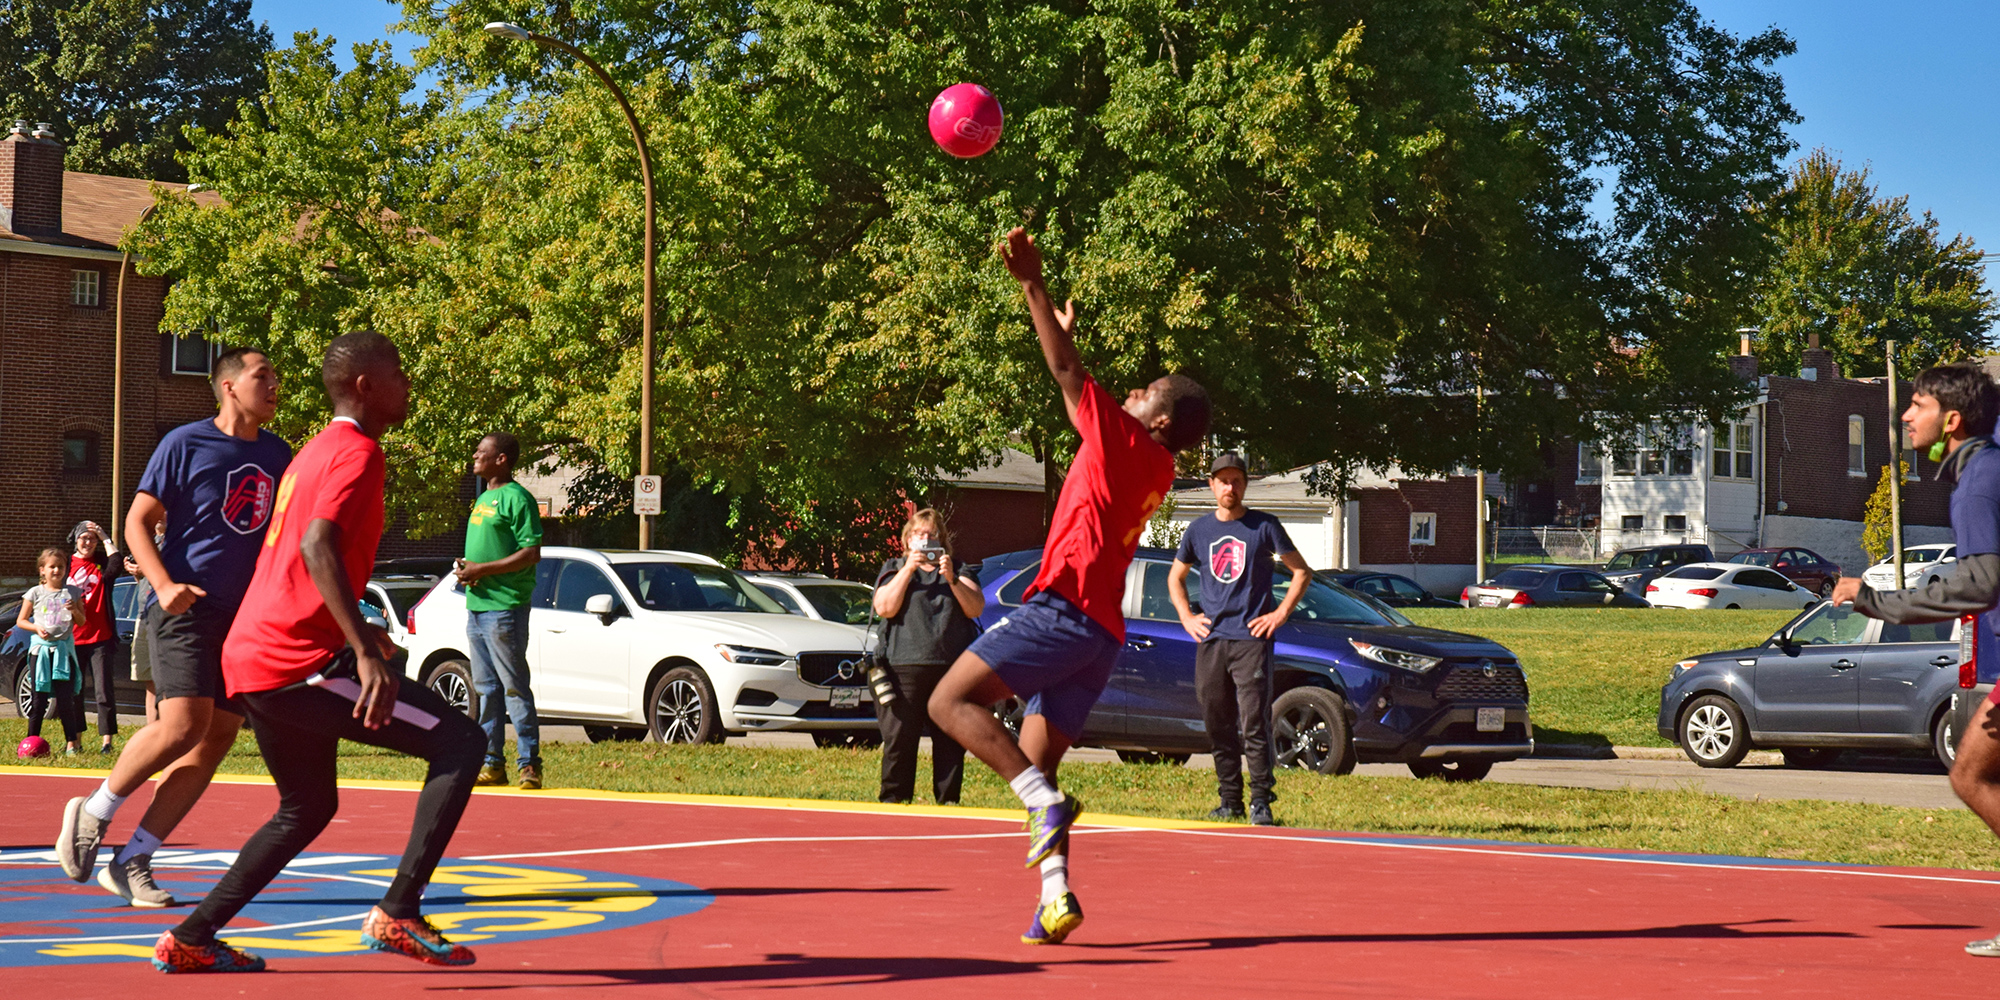 Playing futsal on the new court at Marquette Park in Dutchtown, St. Louis, MO.